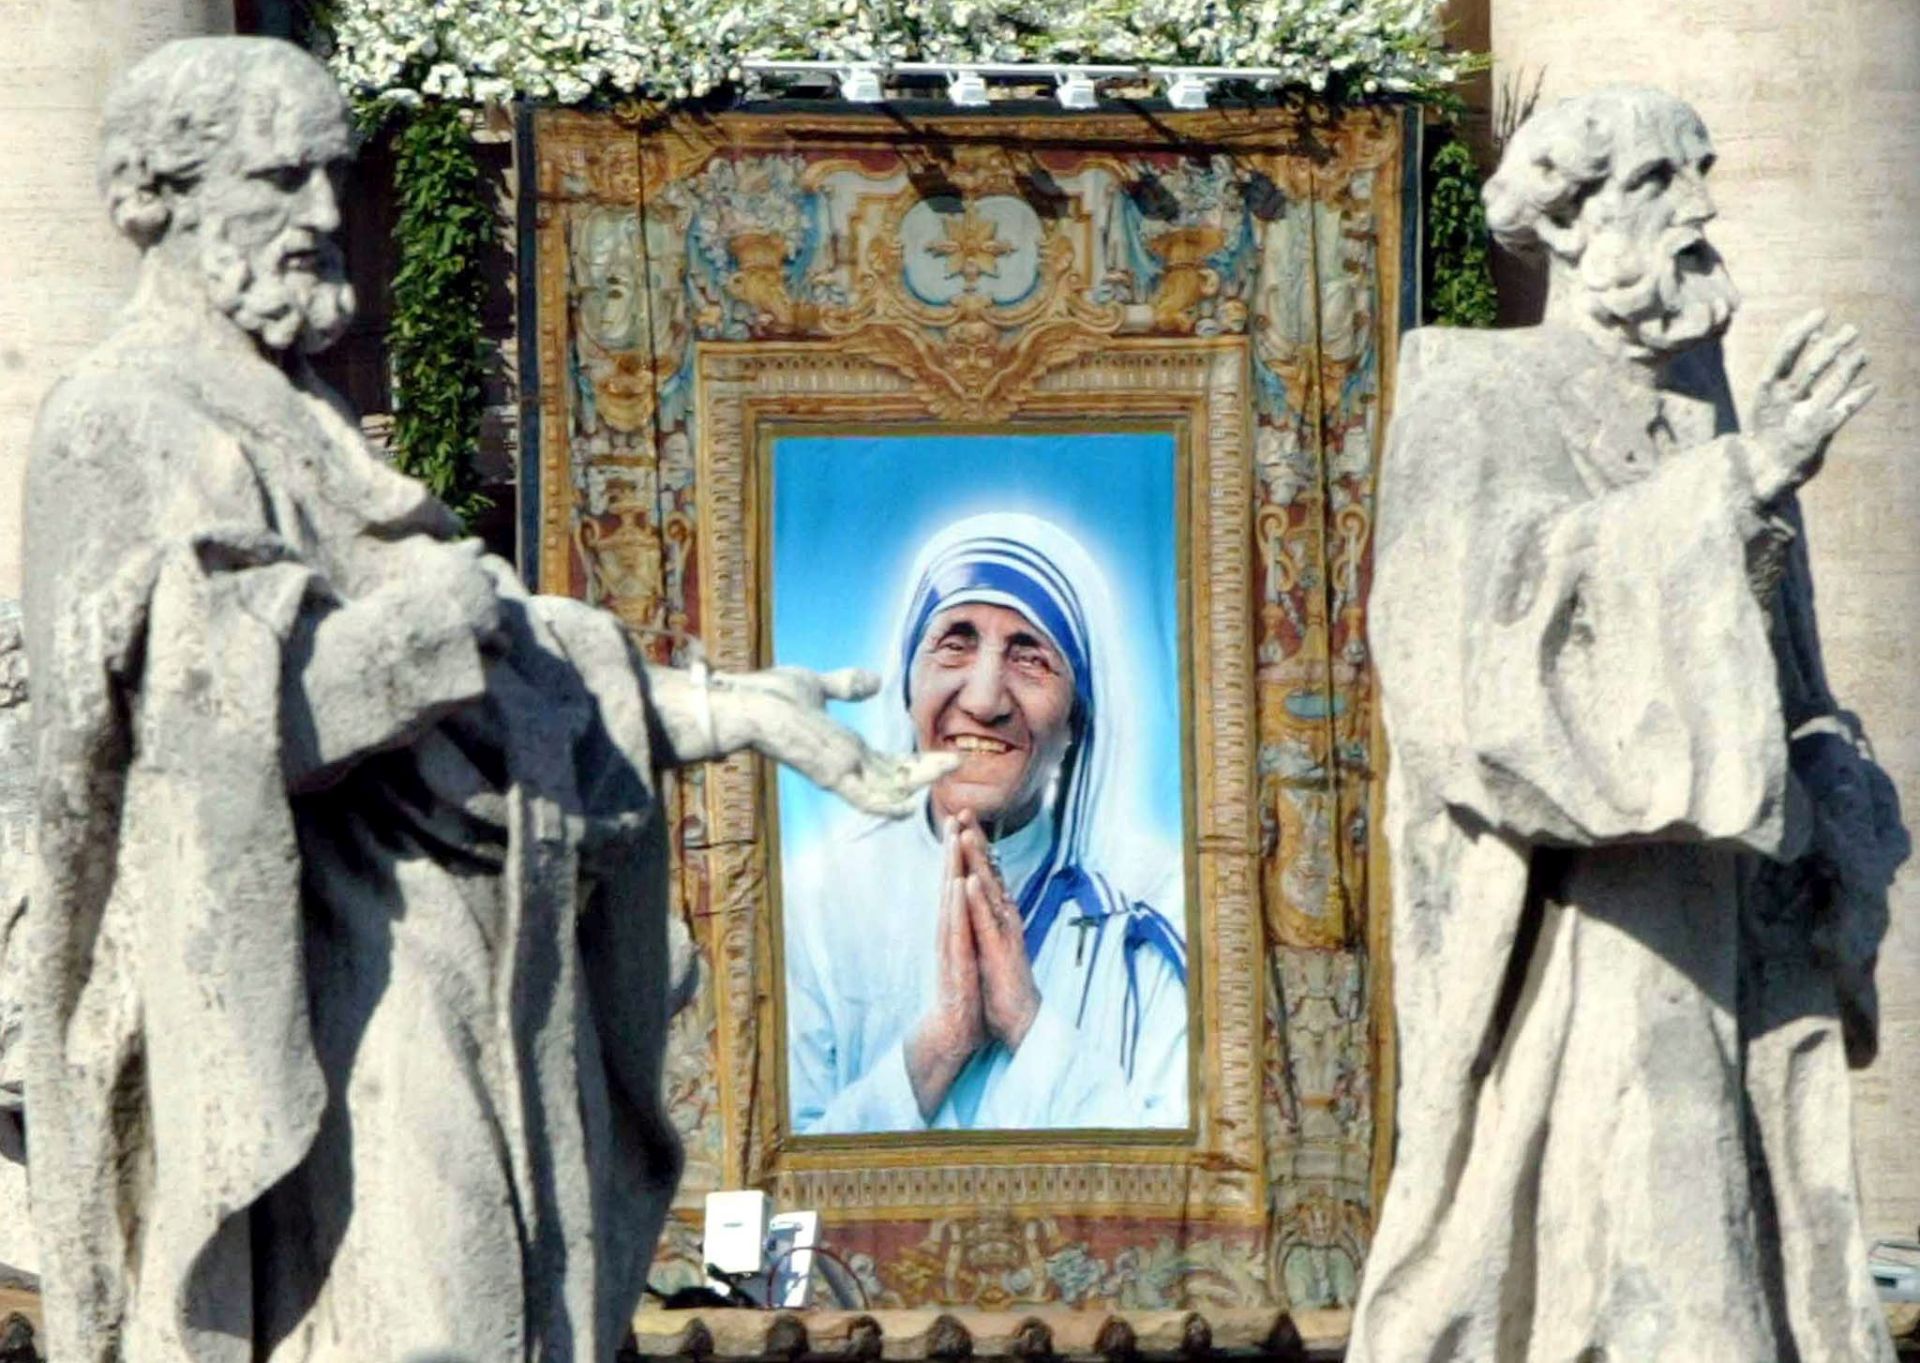 epa05517916 (FILE) A file picture dated 19 October 2003 shows a portrait of Mother Theresa of Calcutta is unveiled on the facade of the basilica  as Pope John Paul II celebrates the beatification mass of Mother Theresa in St Peter's Square at the Vatican. Mother Teresa was born Agnes Gonxha Bojaxhiu on 26 August 1910 to Albanian parents in Skopje, Macedonia. She began her missionary work with the poor in Calcutta in 1948, and won the Nobel Peace Prize in 1979. Following her death in 1997 she was beatified by Pope John Paul II and given the title Blessed Teresa of Calcutta. The Mother Teresa of Calcutta canonization ceremony will take place on 04 September 2016.  EPA/FILIPPO MONTEFORTE